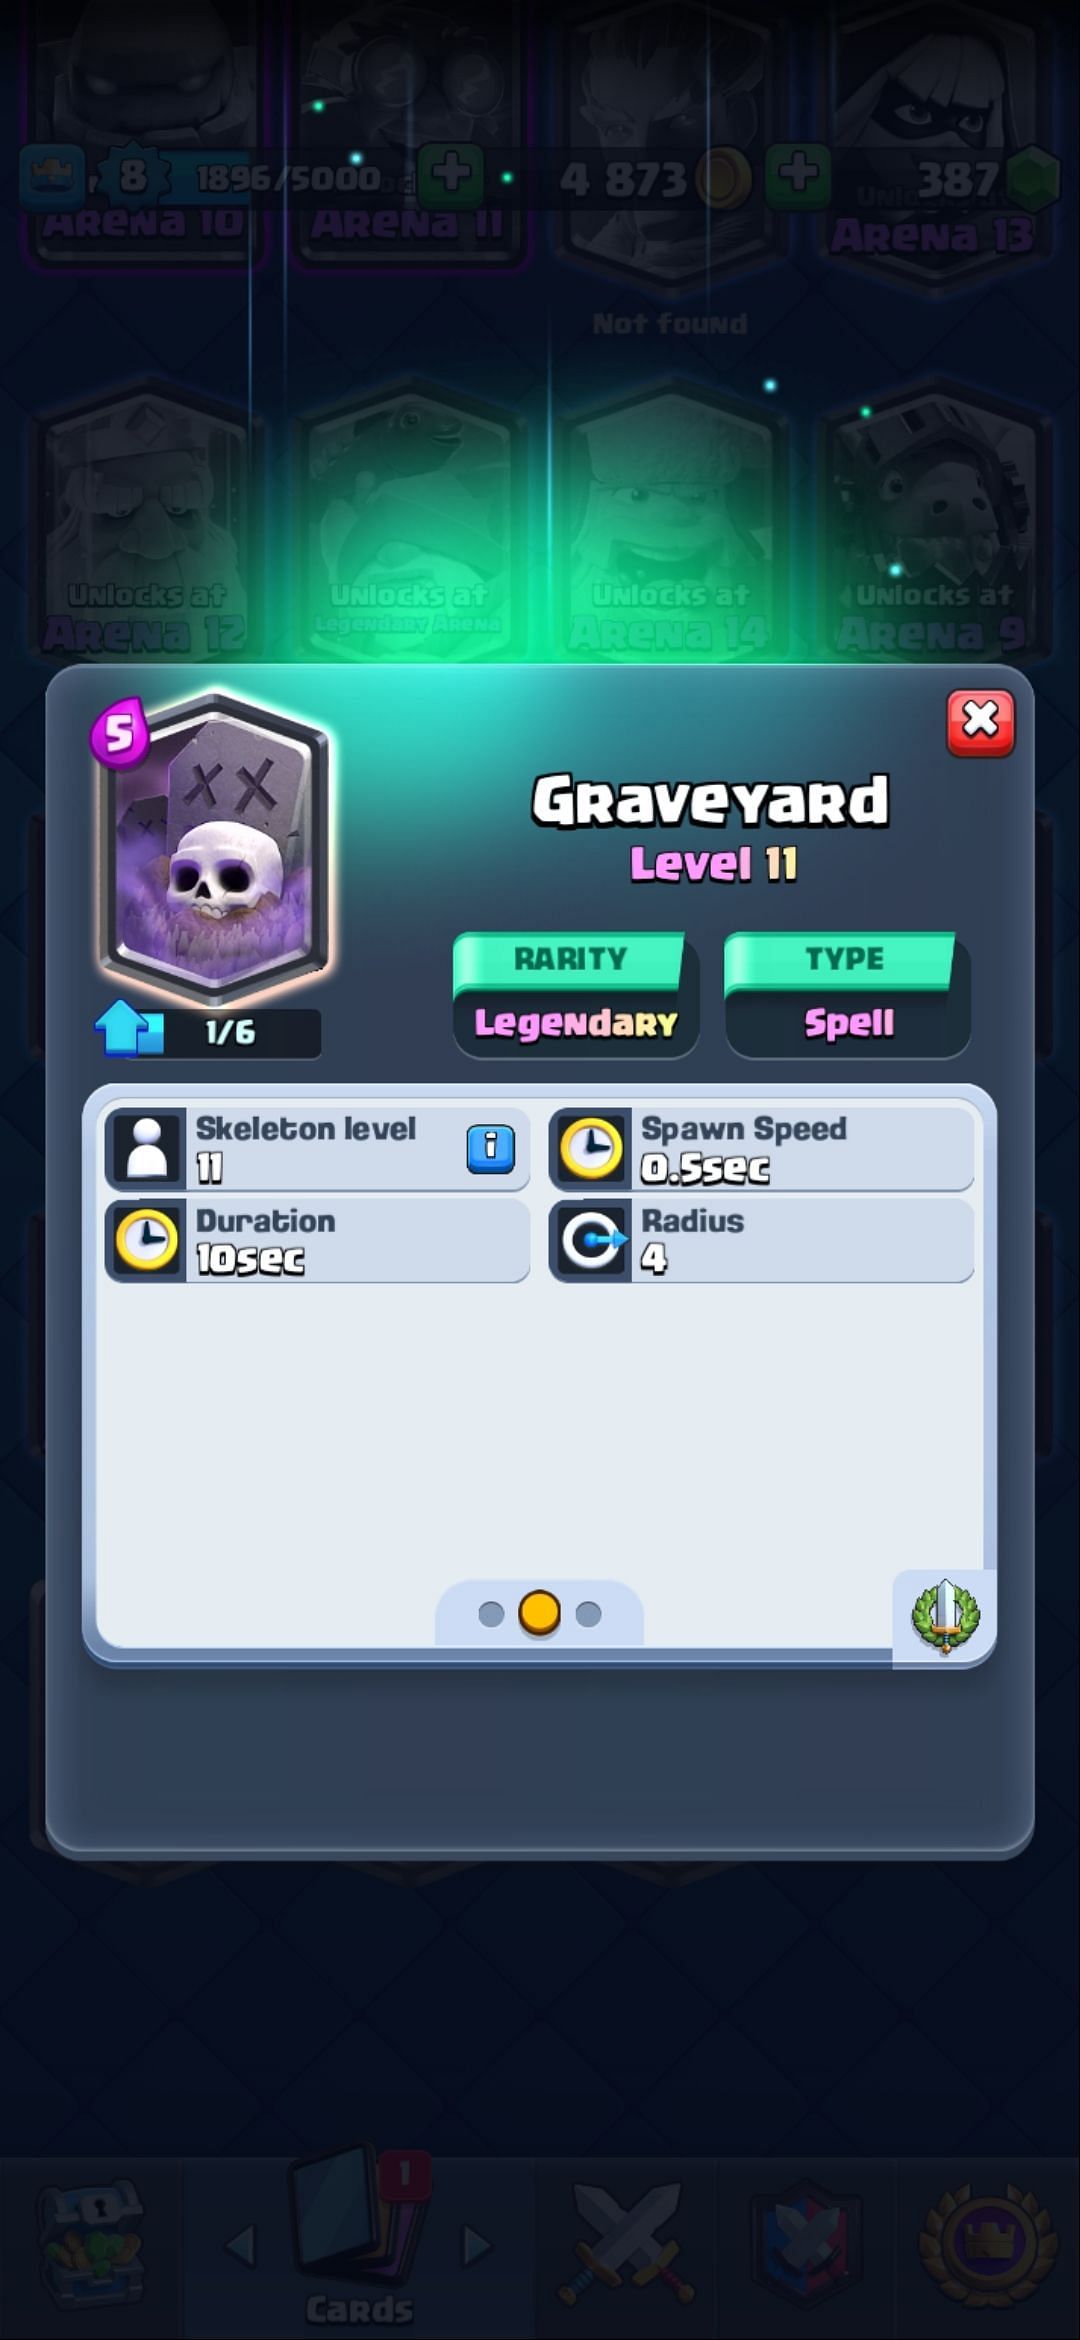 The Graveyard card in Clash Royale (Image via Supercell)